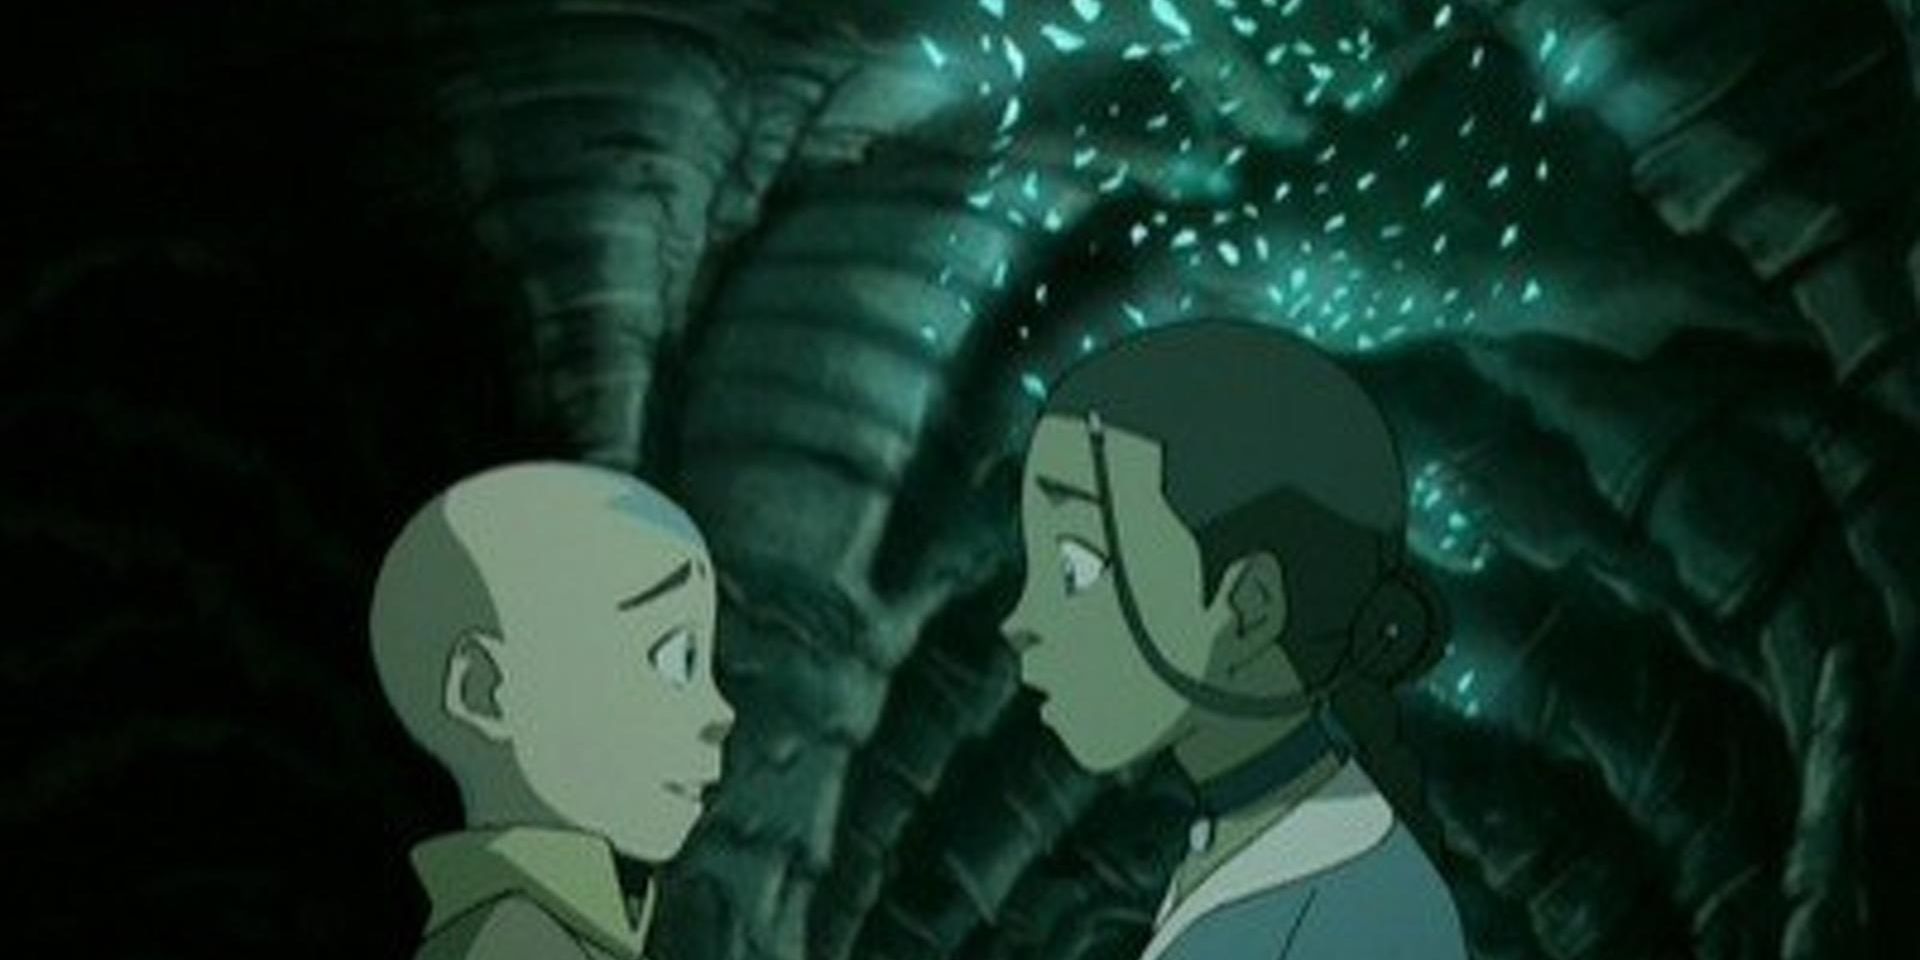 Aang and Katara talking in the dark in "The Cave Of Two Lovers" in Avatar: The Last Airbender